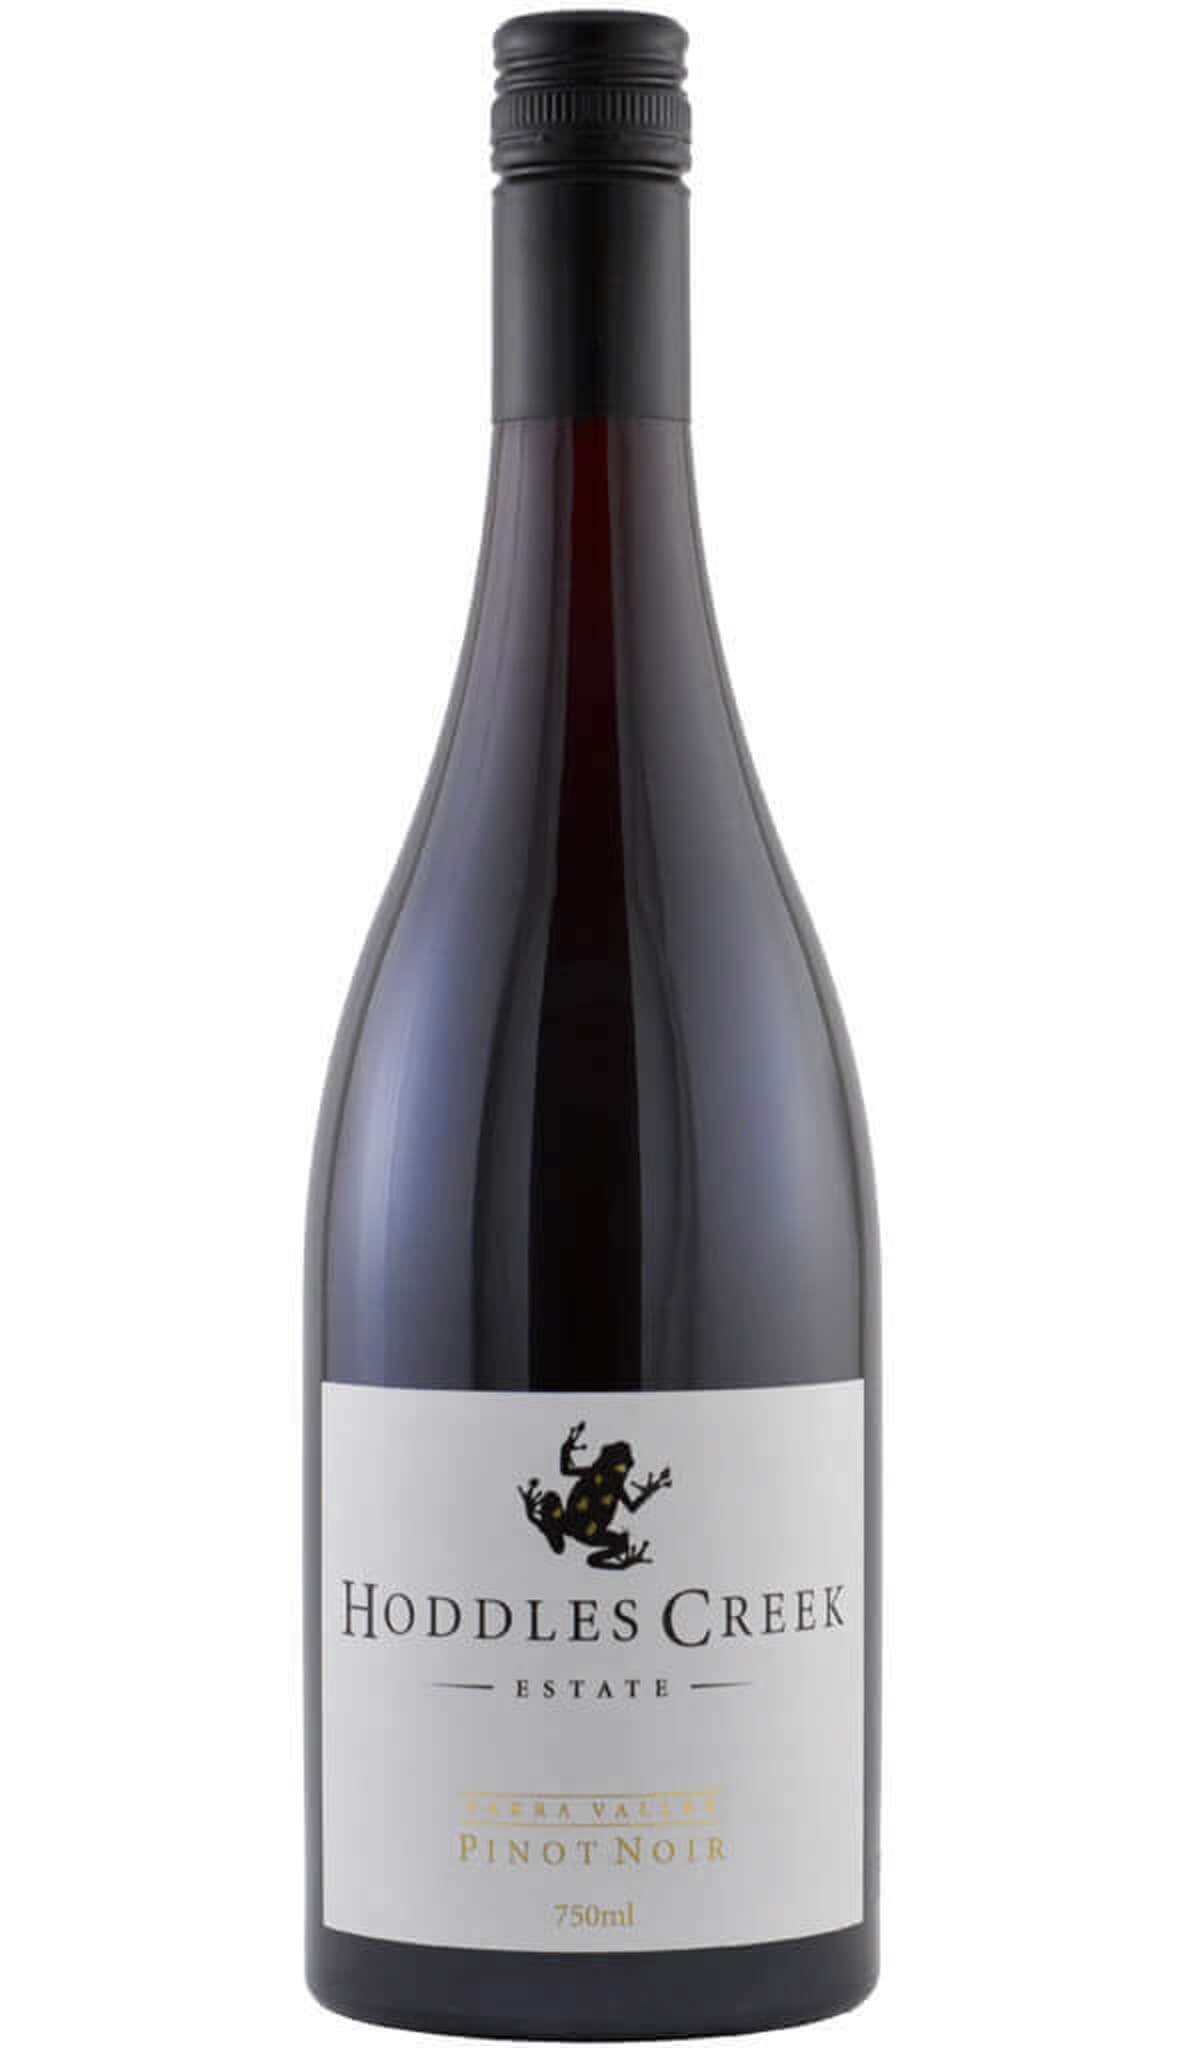 Find out more or buy Hoddles Creek Pinot Noir 2022 (Yarra Valley) online at Wine Sellers Direct - Australia’s independent liquor specialists.